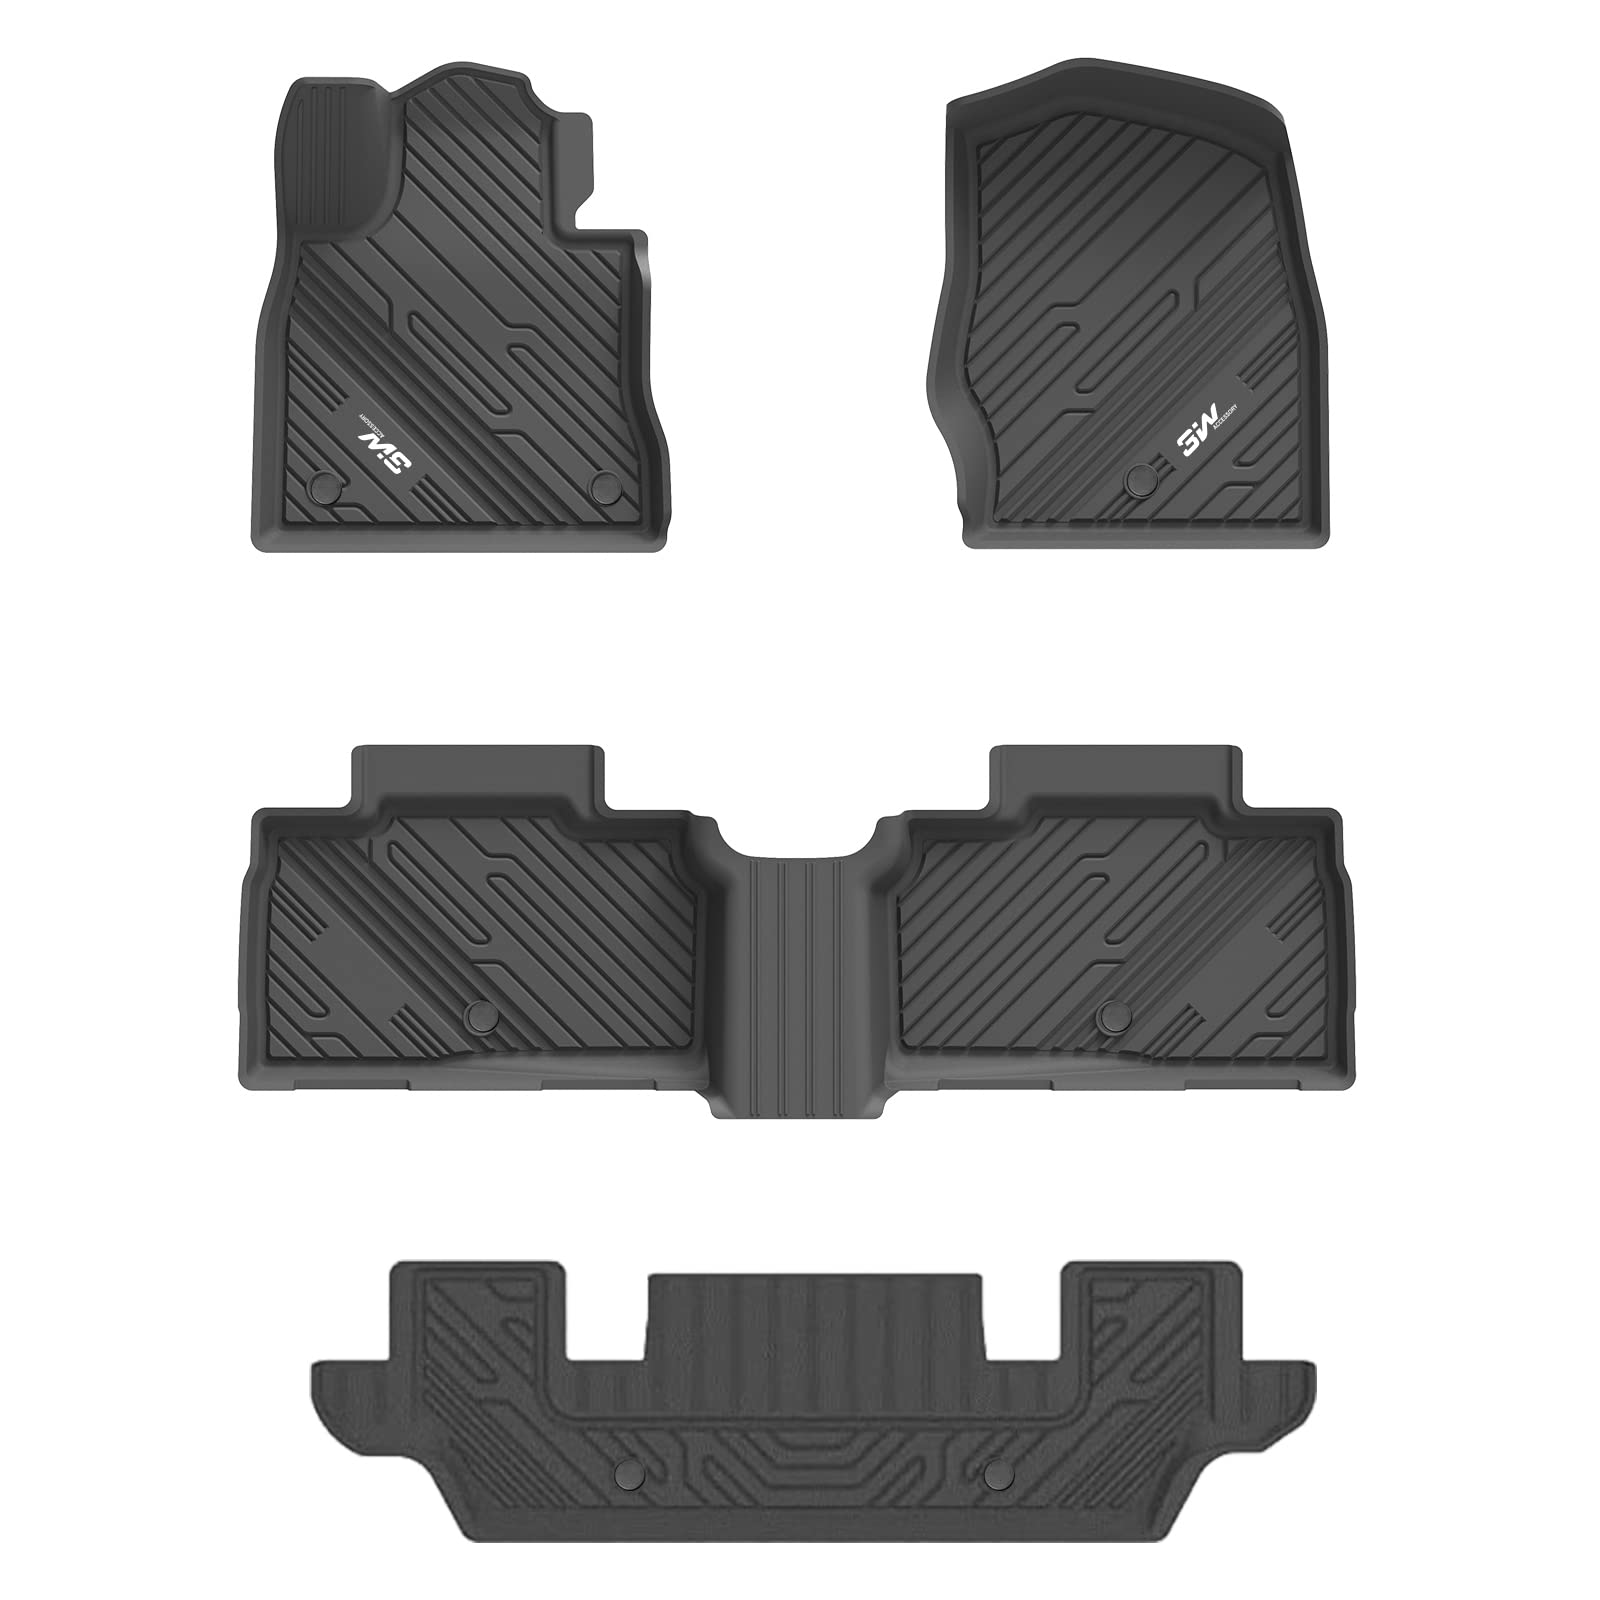 3W Ford Explorer 2020-2024 Floor Mats 6-Seat (Includes Hybrid) TPE Material & All-Weather Protection Vehicles & Parts 3Wliners   